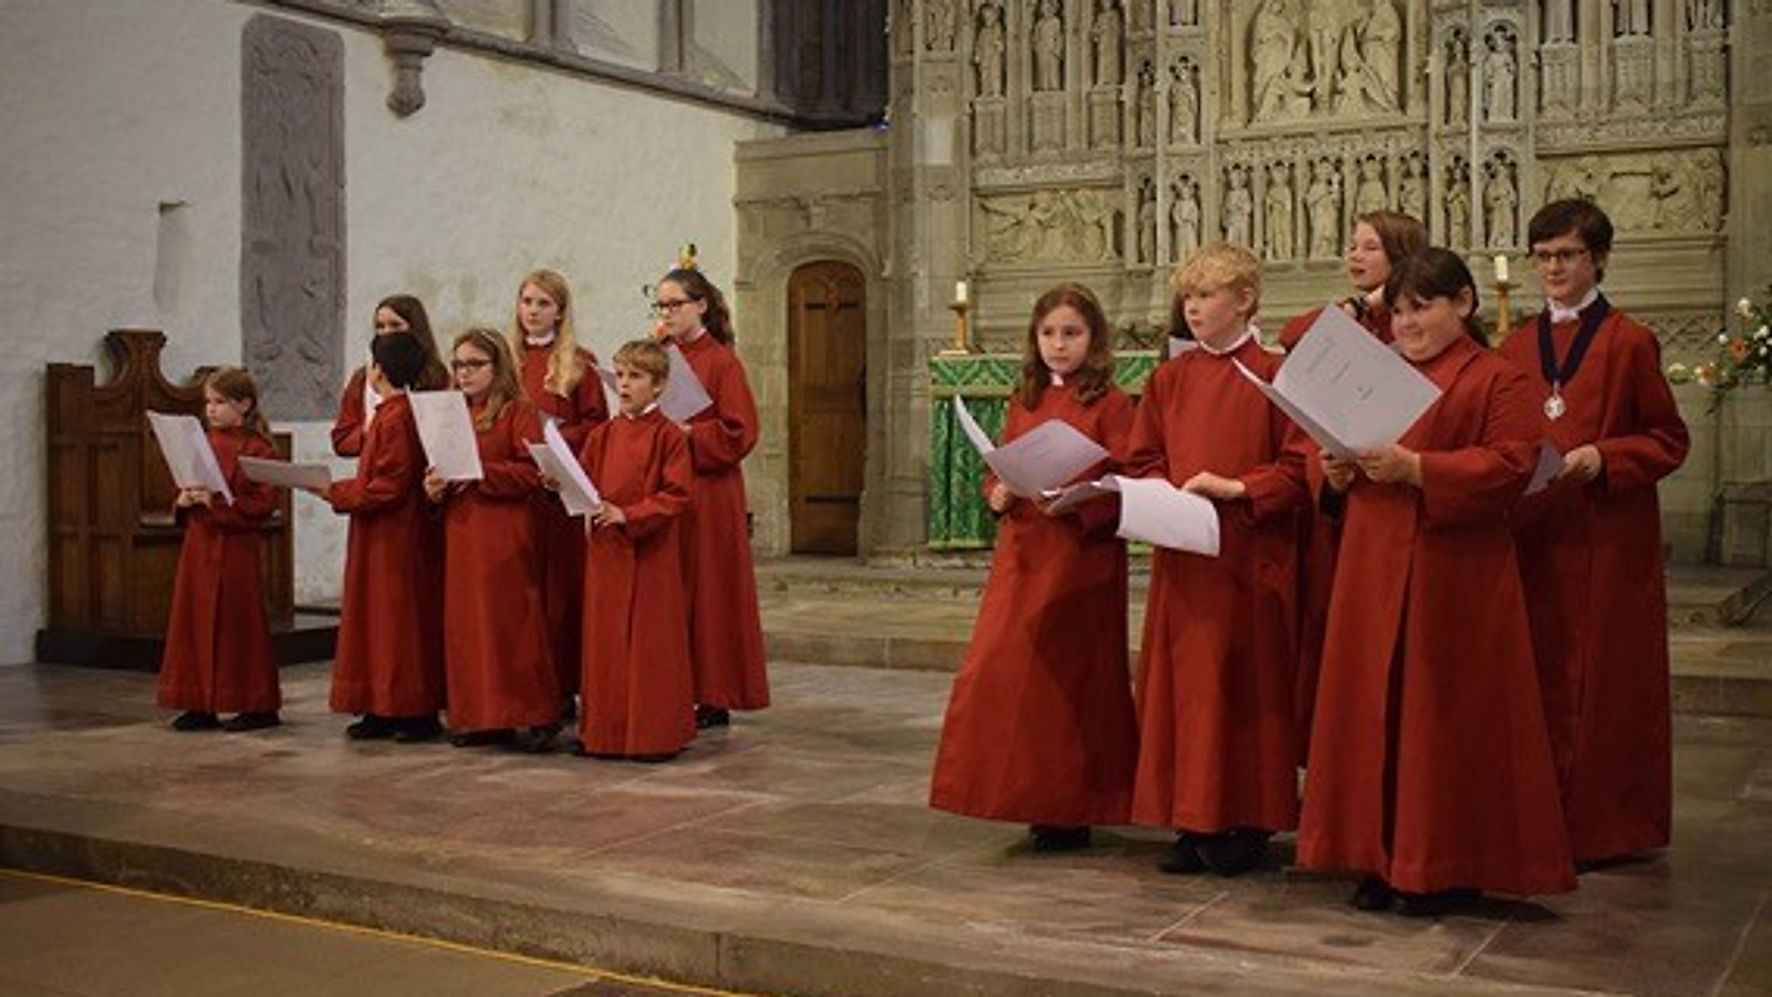 Brecon Cathedral Choristers - Grenfell From Today